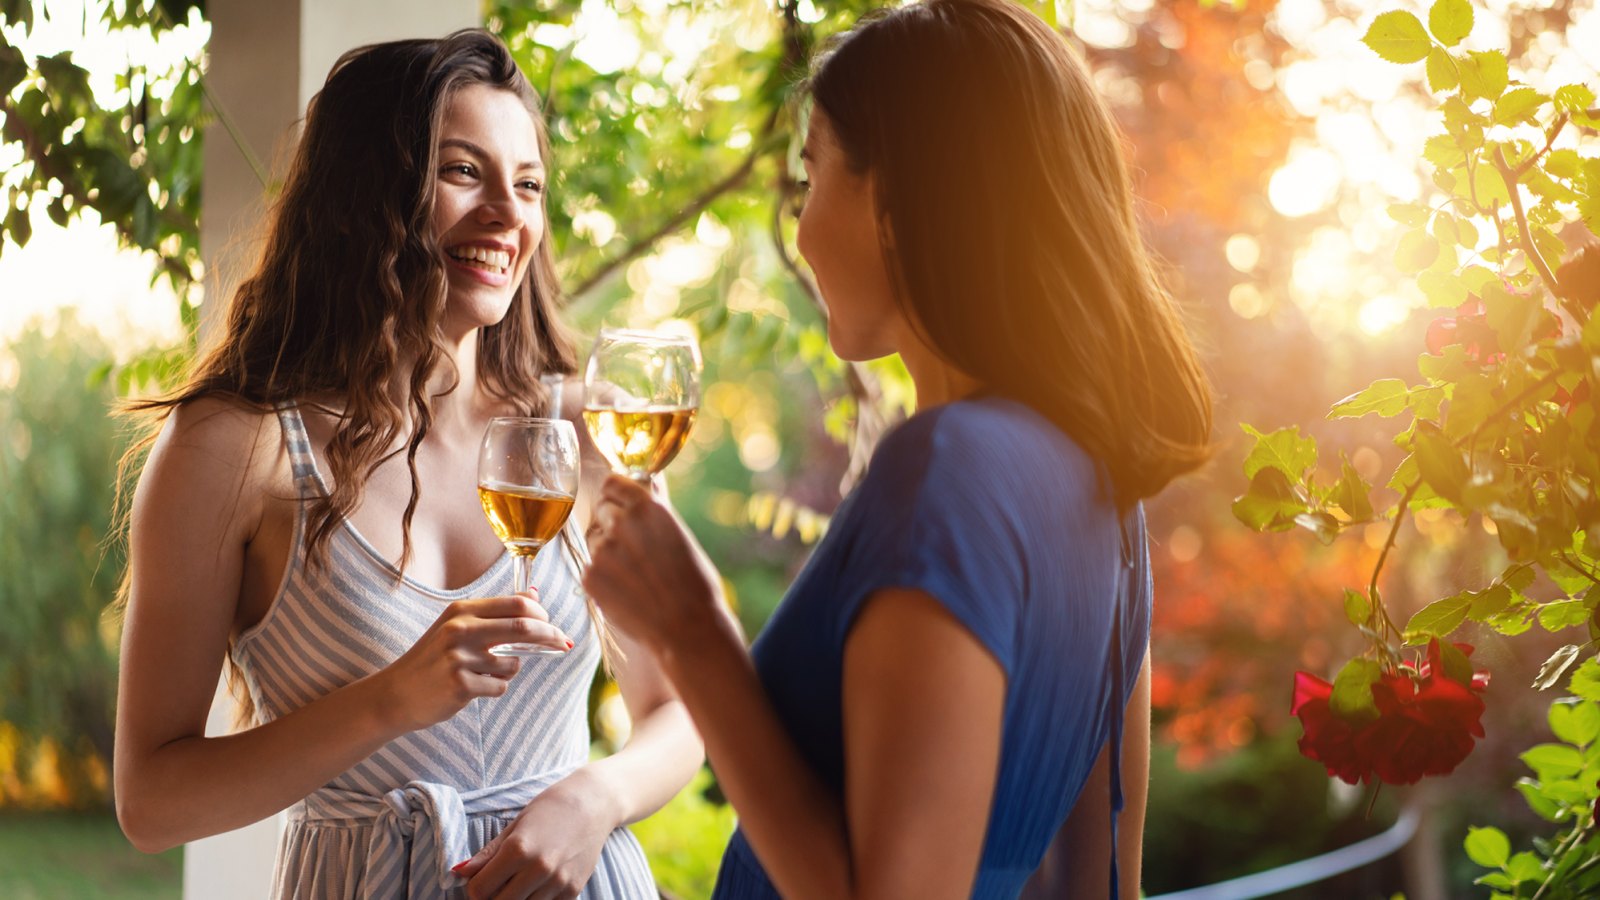 Joyful friends, drinking wine while having a casual conversation during summer garden party